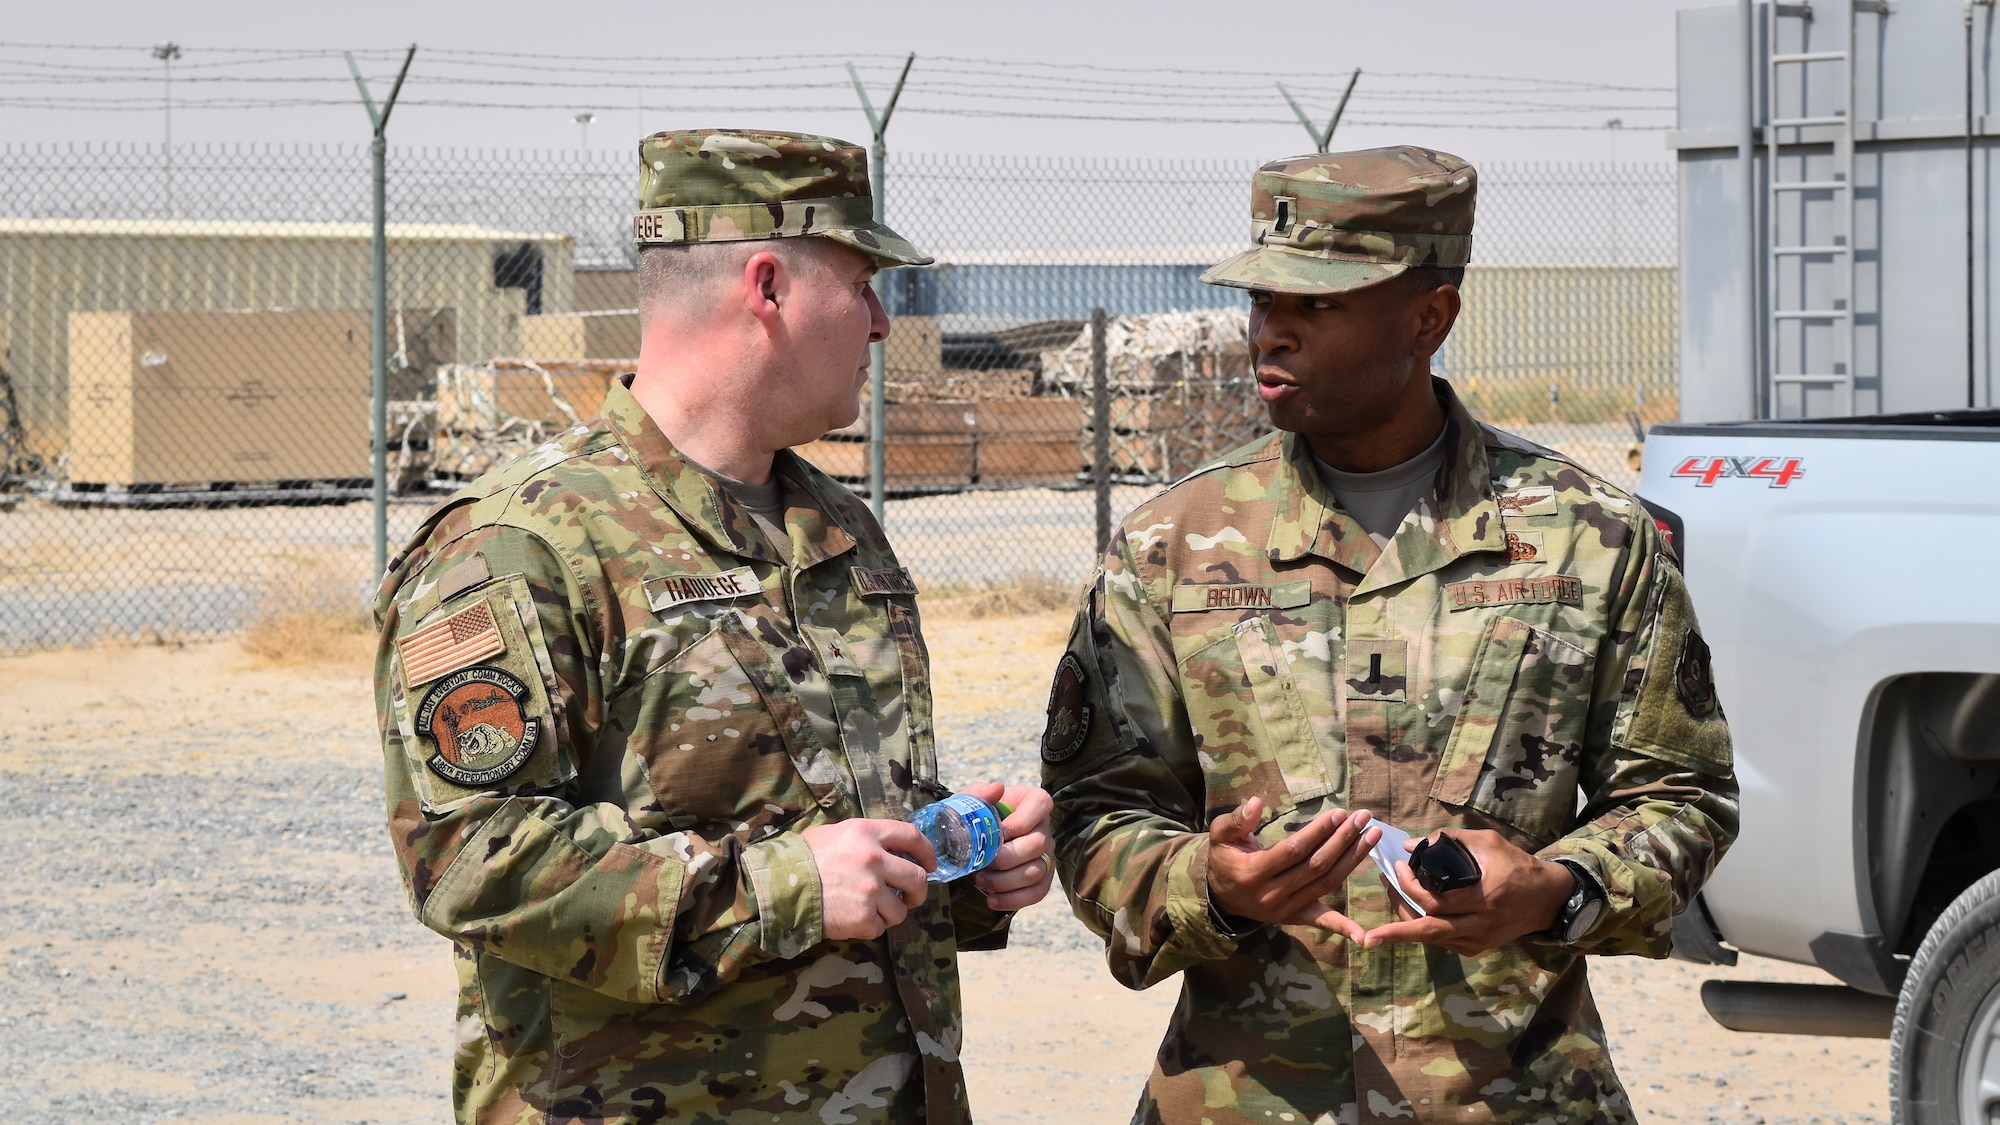 U.S. Air Force Brig. Gen. Chad Raduege, Air Combat Command director of cyberspace and information dominance, and chief information officer, listens to 1st Lt. Earl Brown, 386th Expeditionary Communications Squadron, while visiting Ali Al Salem Air Base, Kuwait, Oct. 2, 2019. Raduege visited Airmen with the 386th Expeditionary Communications Squadron during a stop at ASAB enroute to the Air Forces Central Command A6 Commander's Summit at Al Udeid Air Base, Qatar. (U.S. Air Force photo by Chief Master Sgt. Joseph Hart)